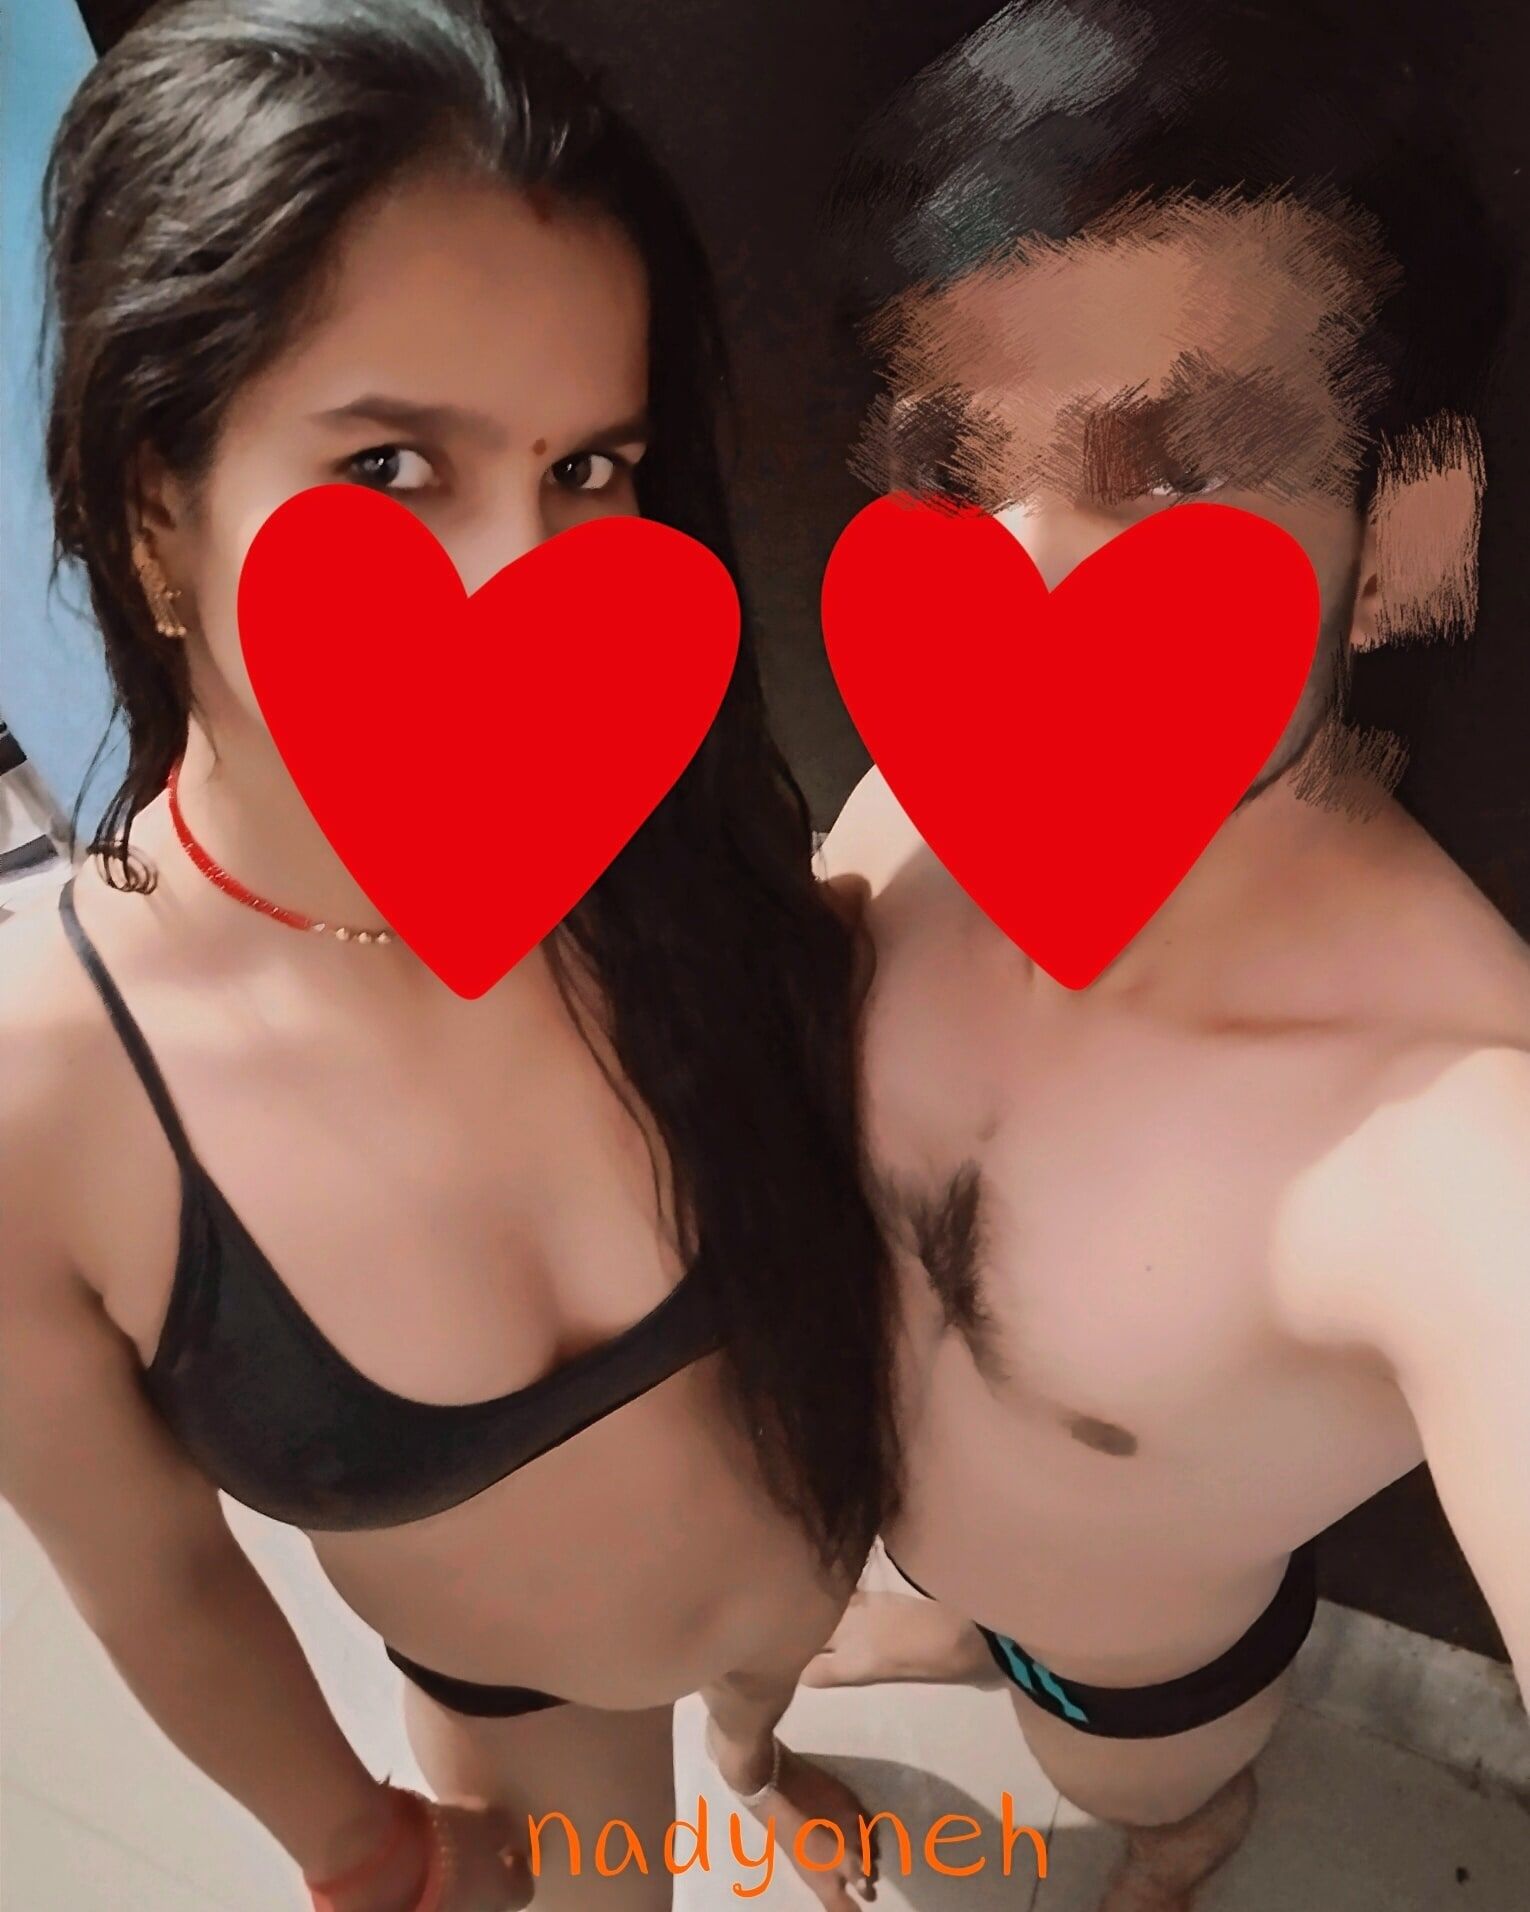 Me and my horny wife jiya .have some fun time photos  #18